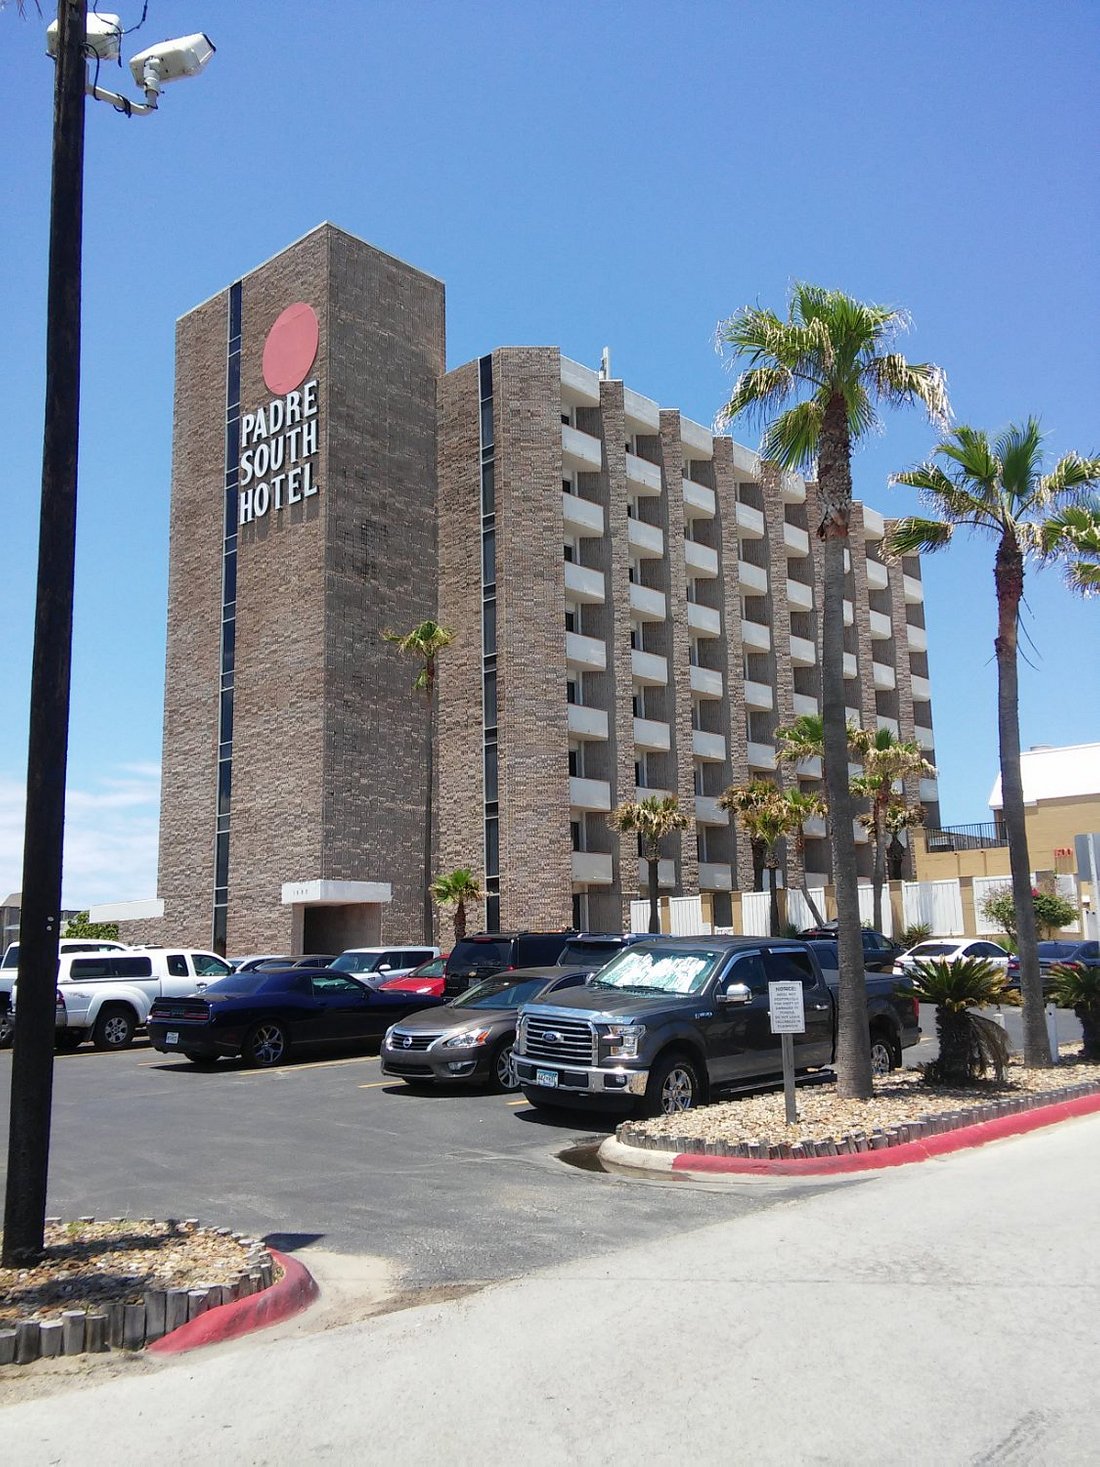 Padre South Hotel Building